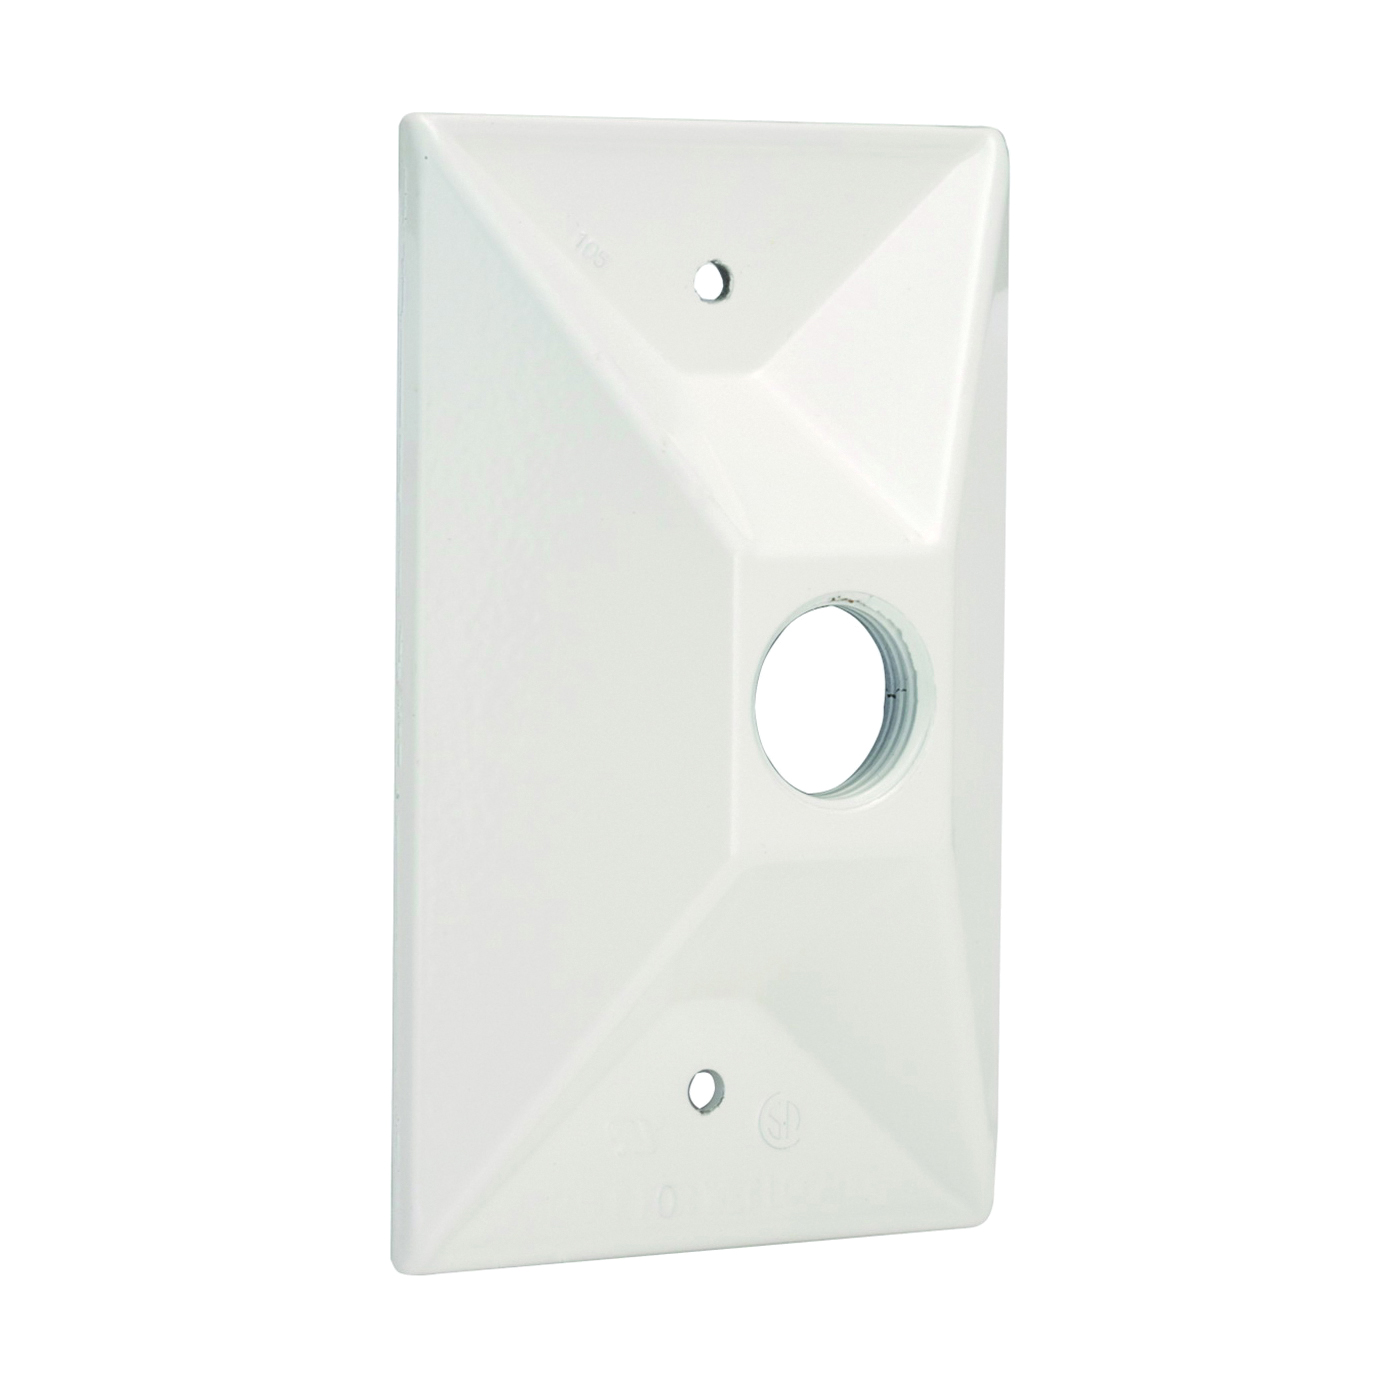 5186-6 Cluster Cover, 4-19/32 in L, 2-27/32 in W, Rectangular, Zinc (Metal), White, Powder-Coated